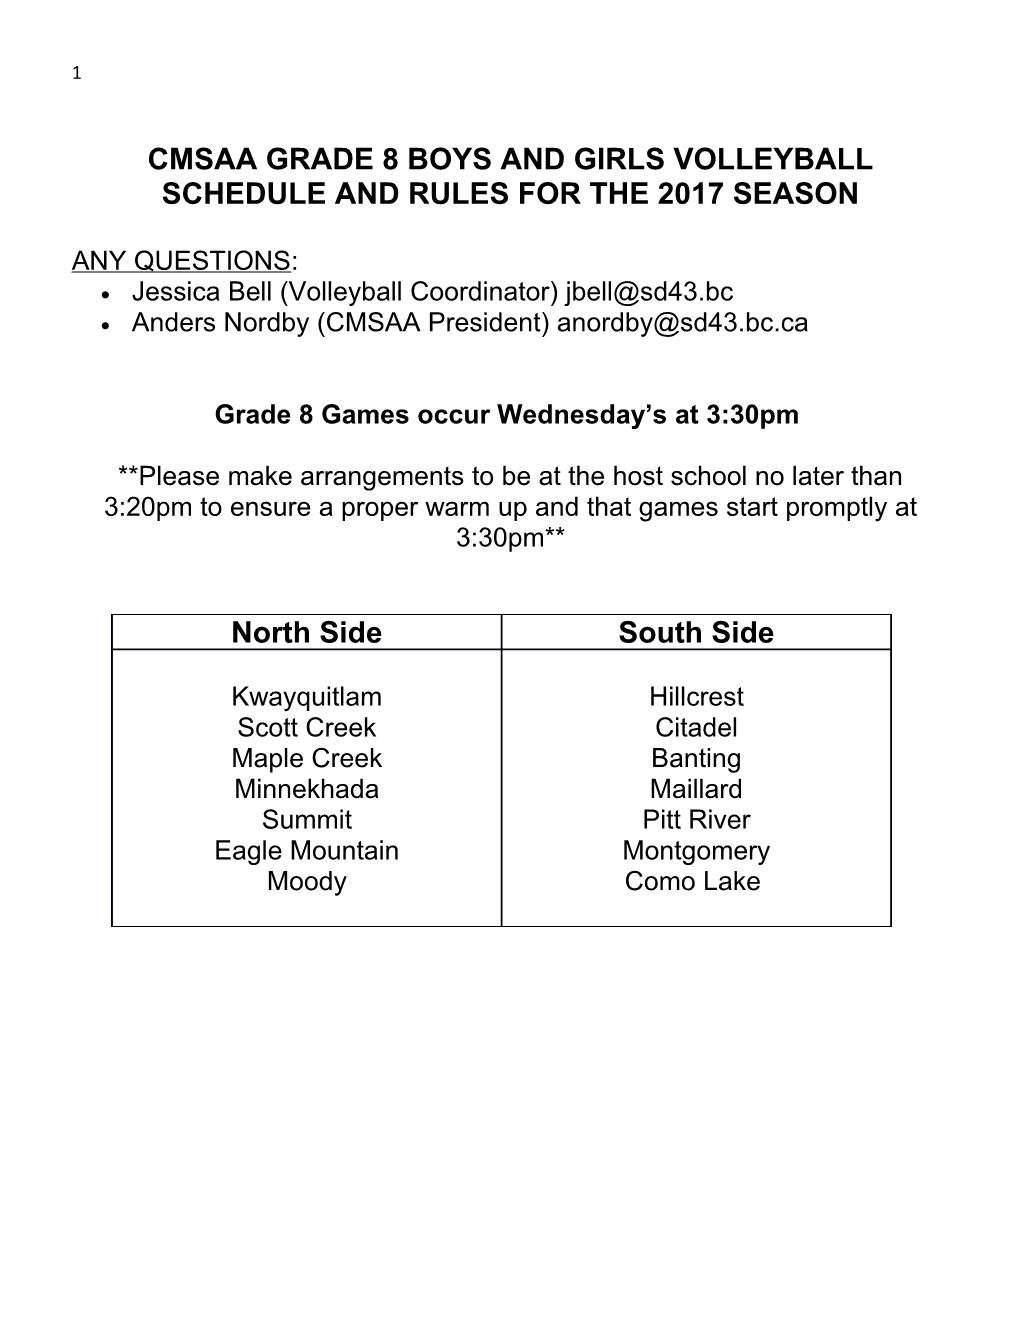 Cmsaa Grade 8 Boys and Girls Volleyball Schedule and Rules for the 2017 Season